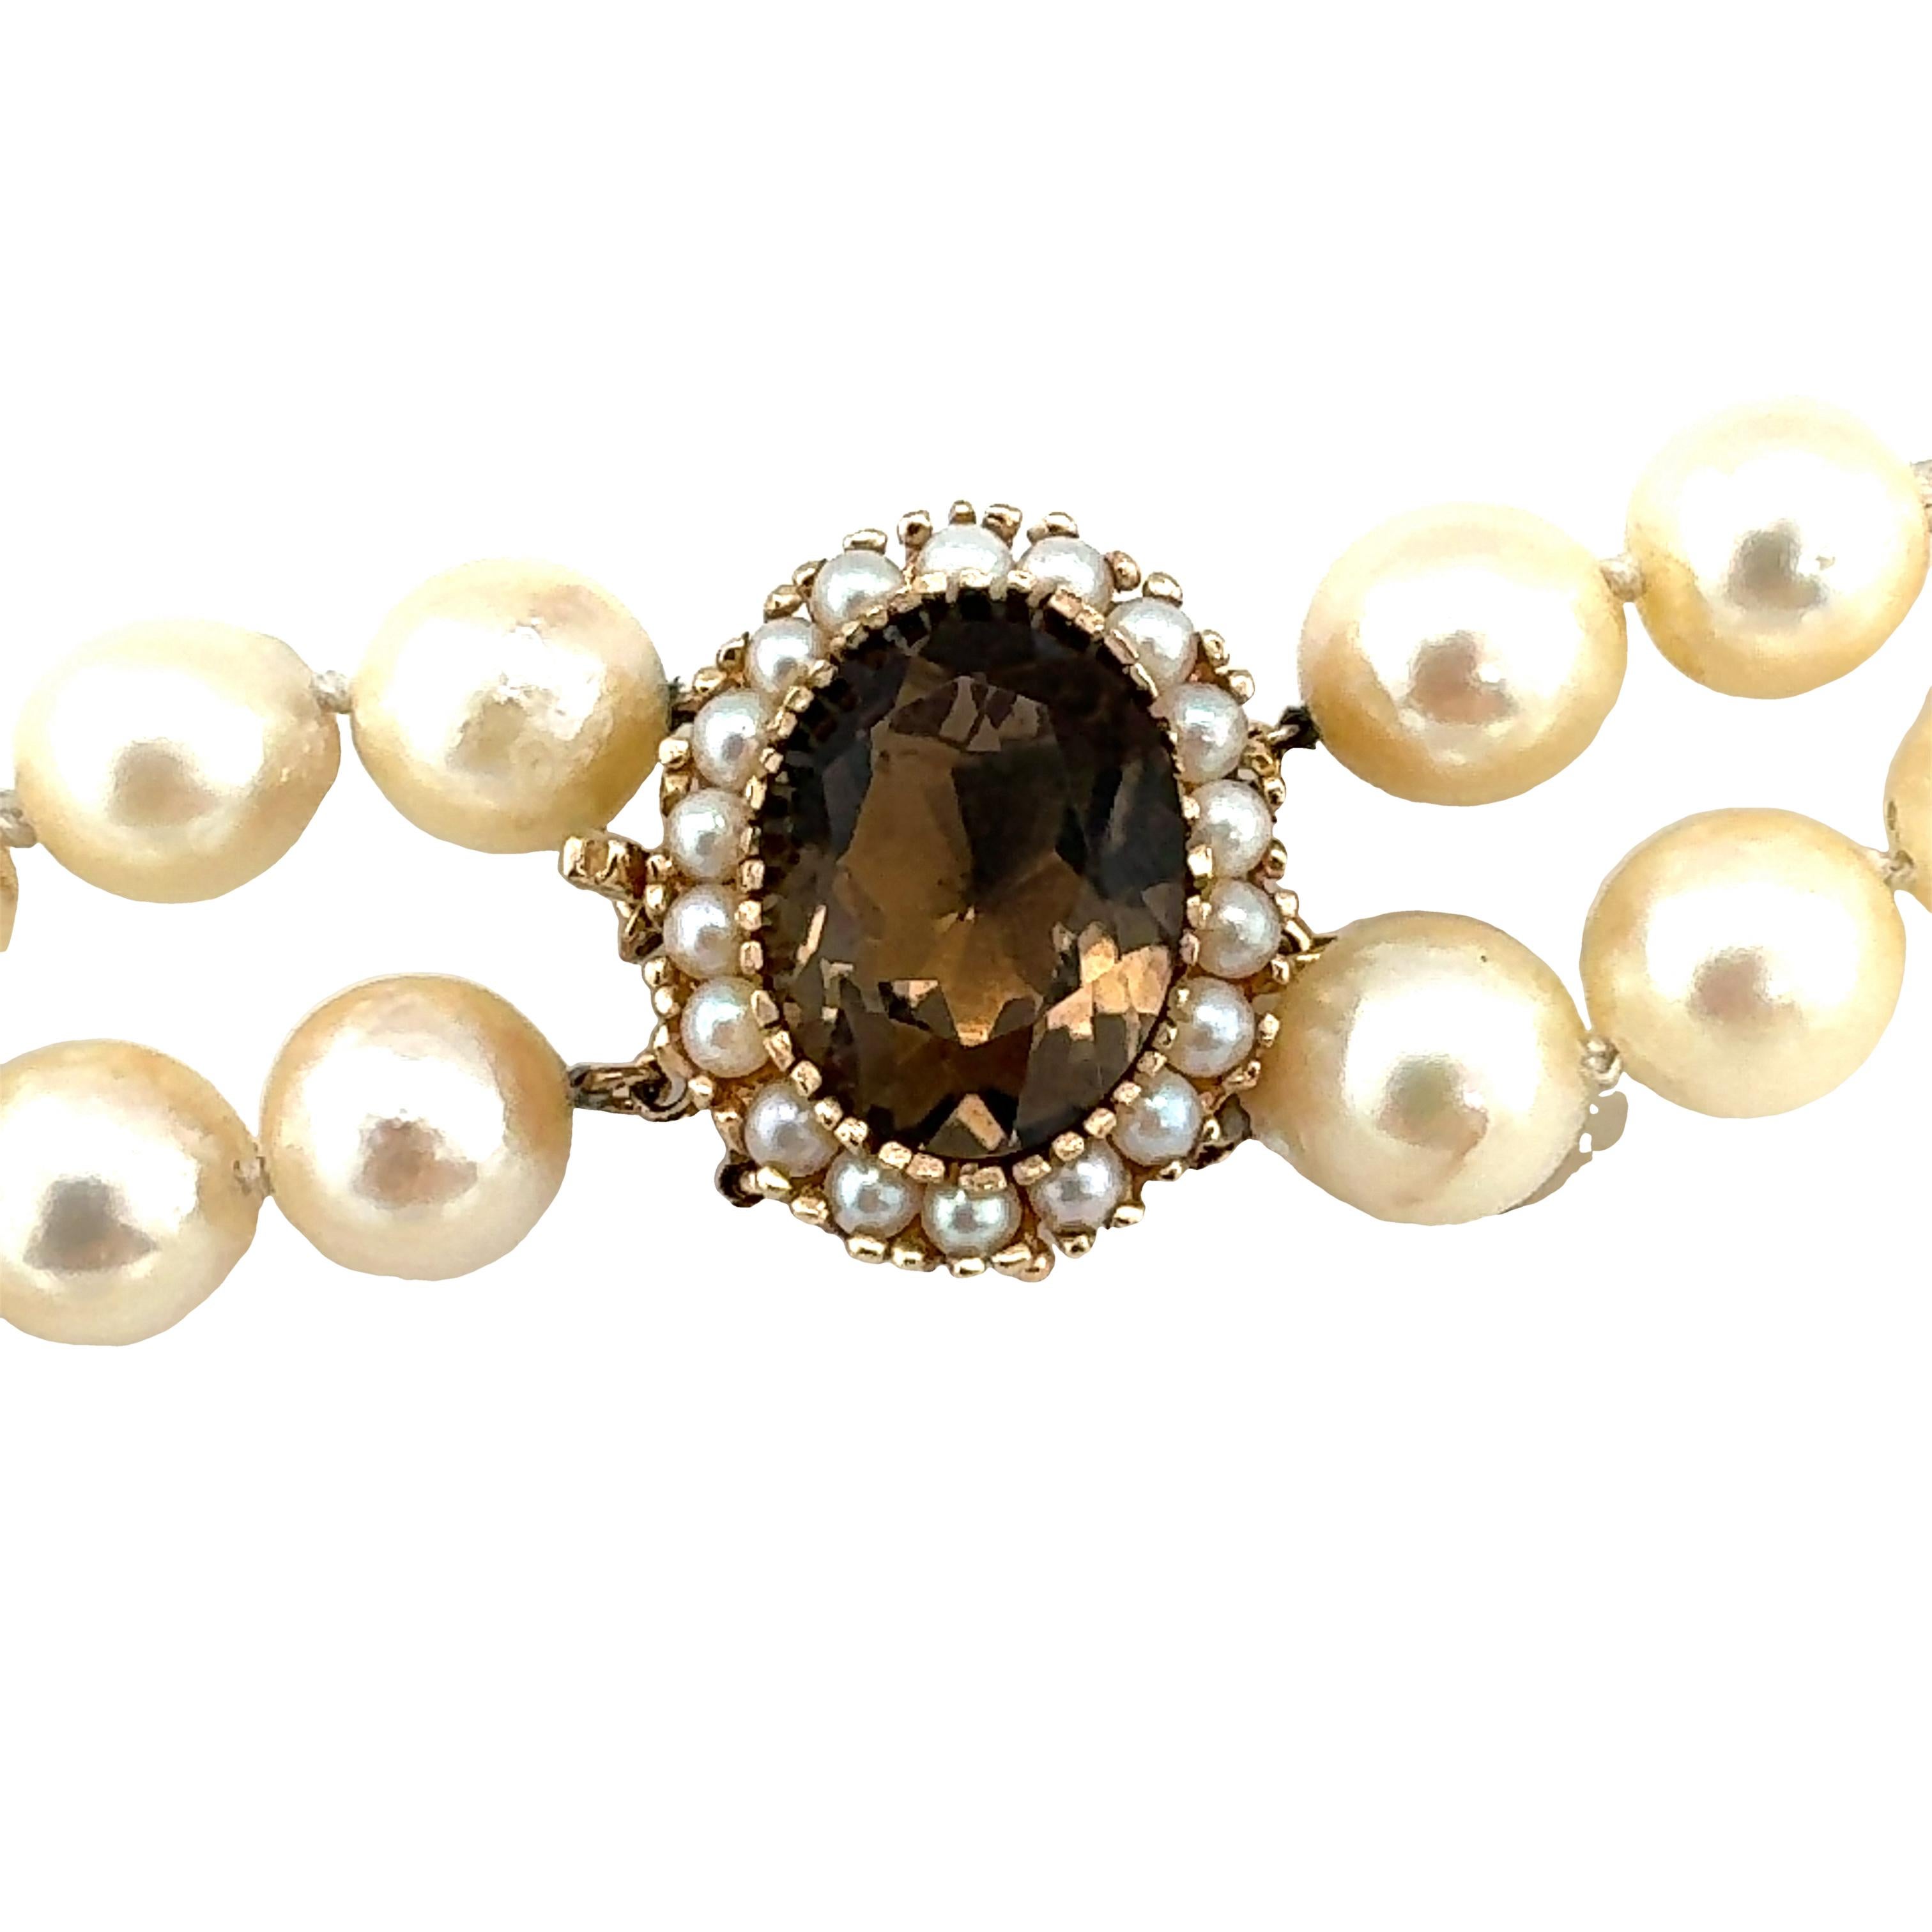 One double-strand pearl necklace featuring 116 round, cream color cultured pearls measuring 8.50-9.00 millimeters in diameter on average. 14K yellow gold clasp with an oval brilliant cut smoky quartz weighing approximately 6.67 ct. along with a seed